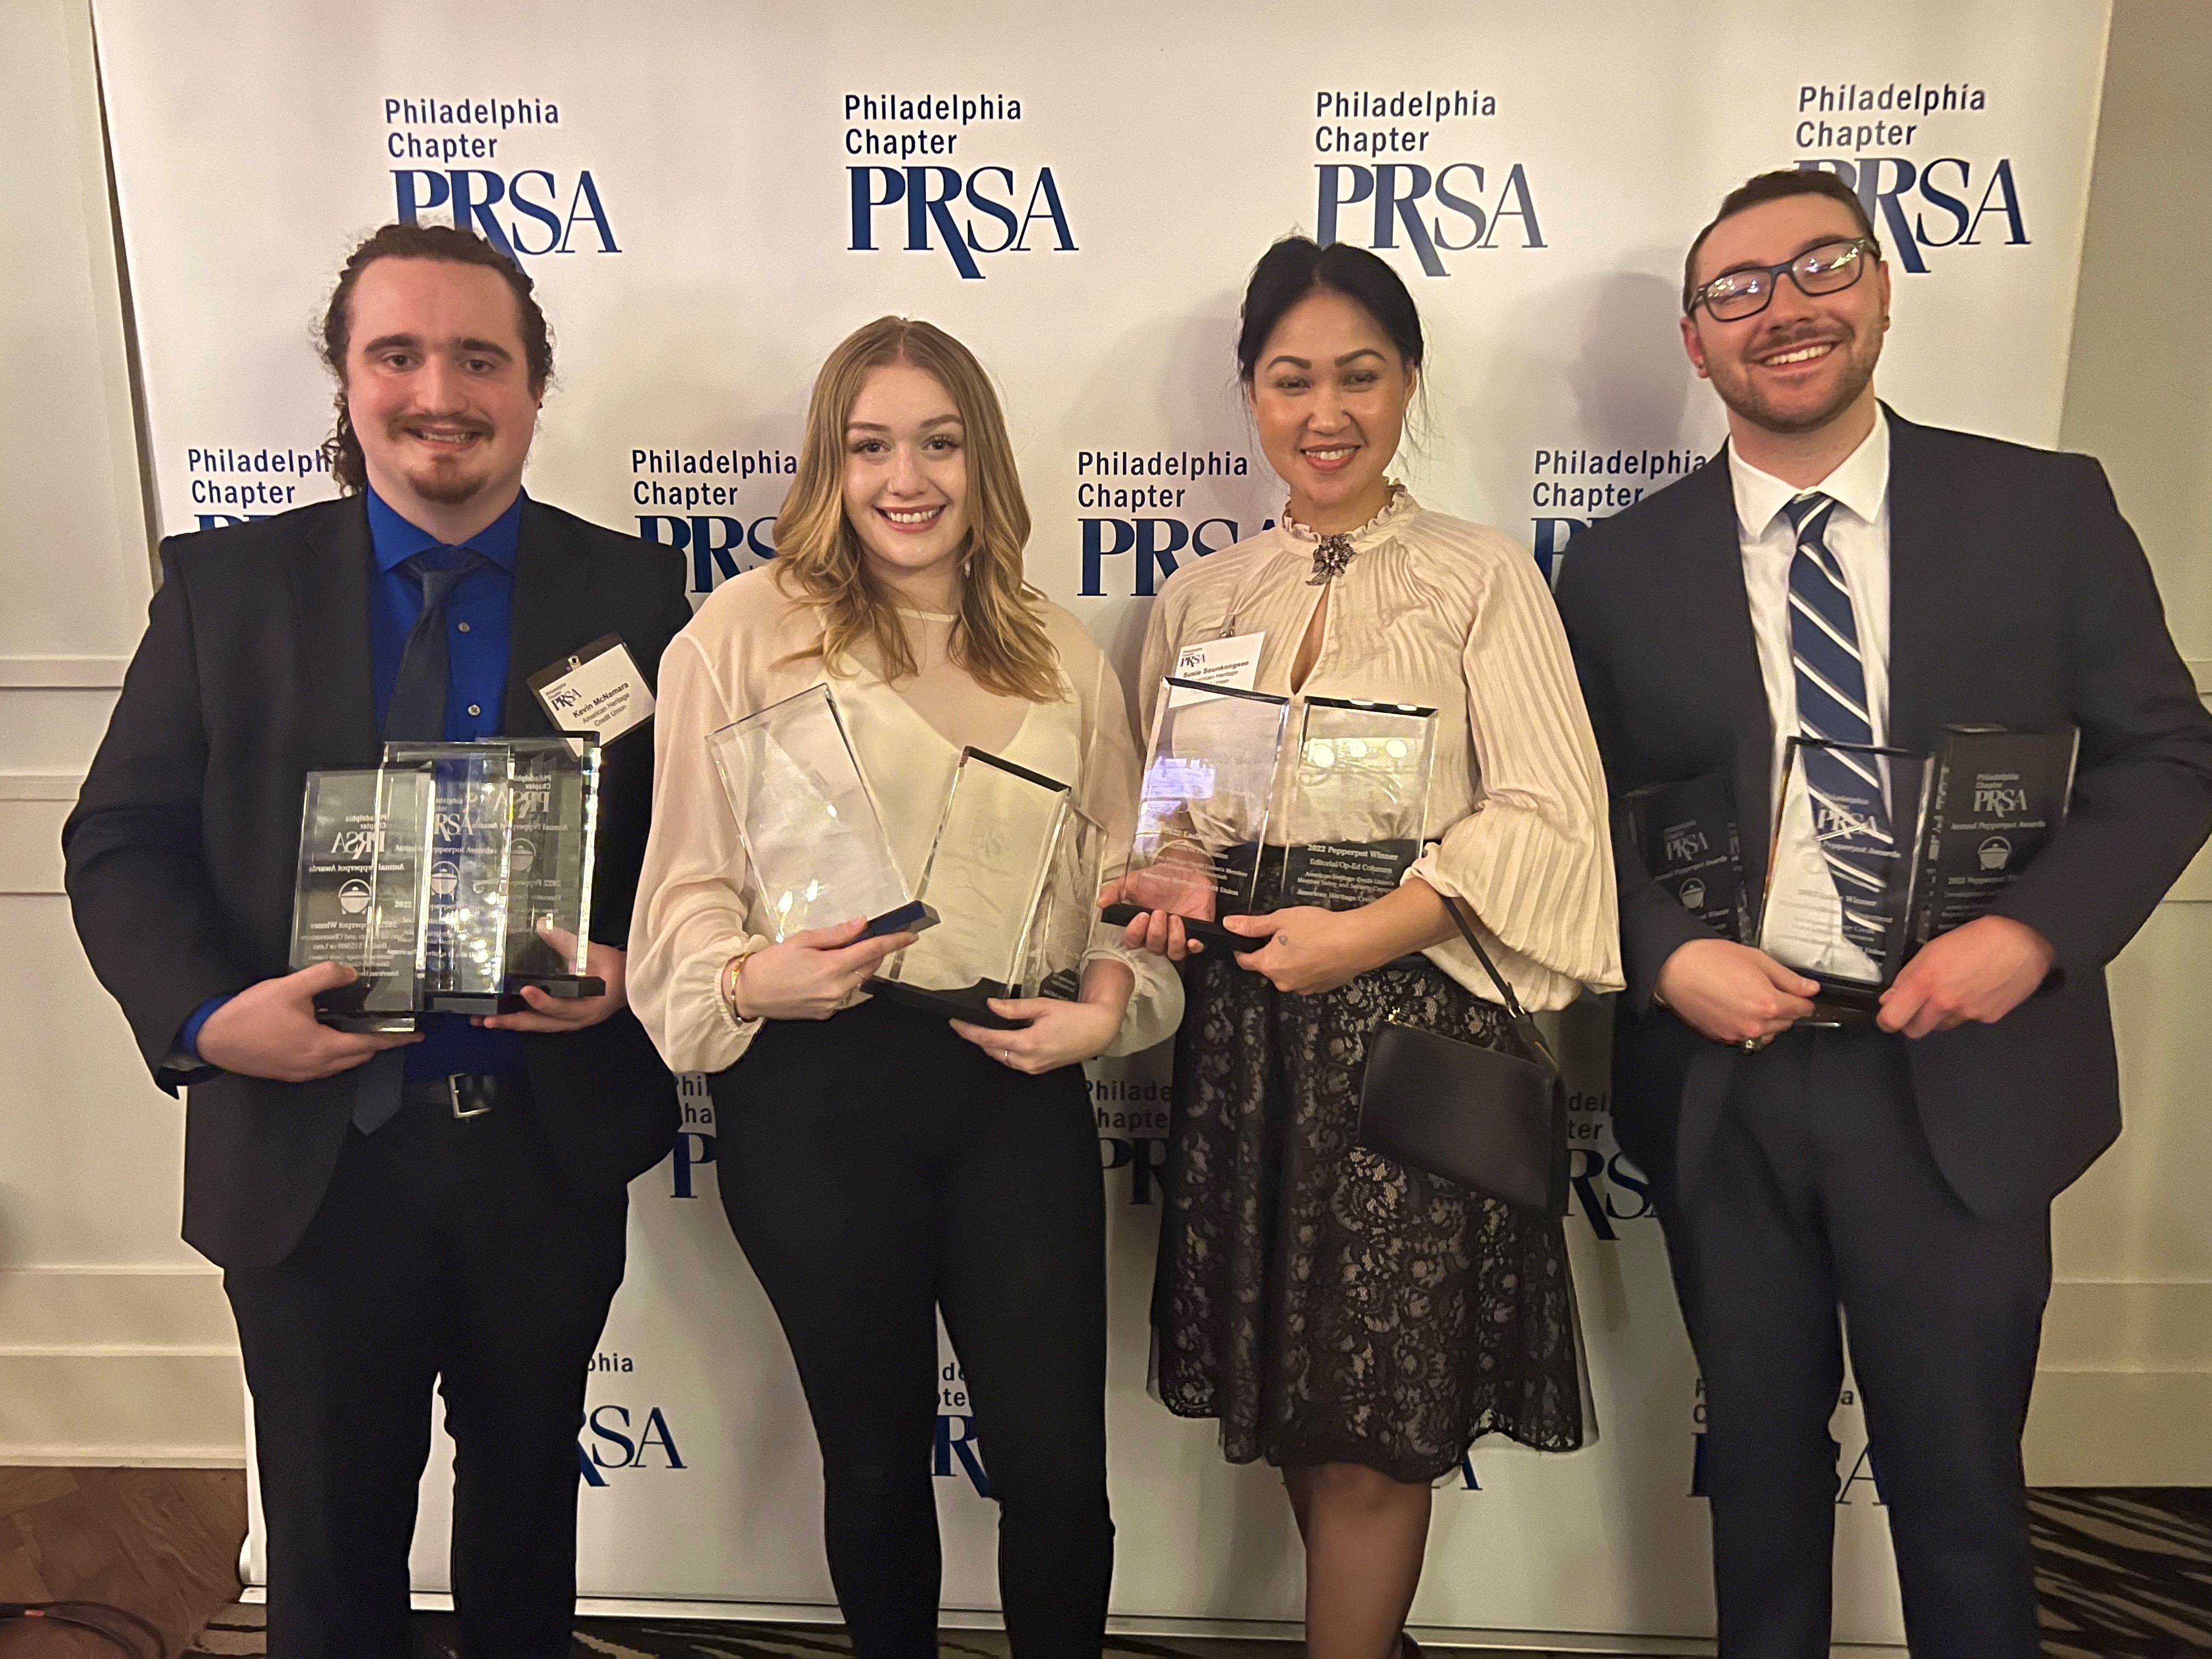 Four American Heritage Associates Hold 11 Total Awards From PRSA